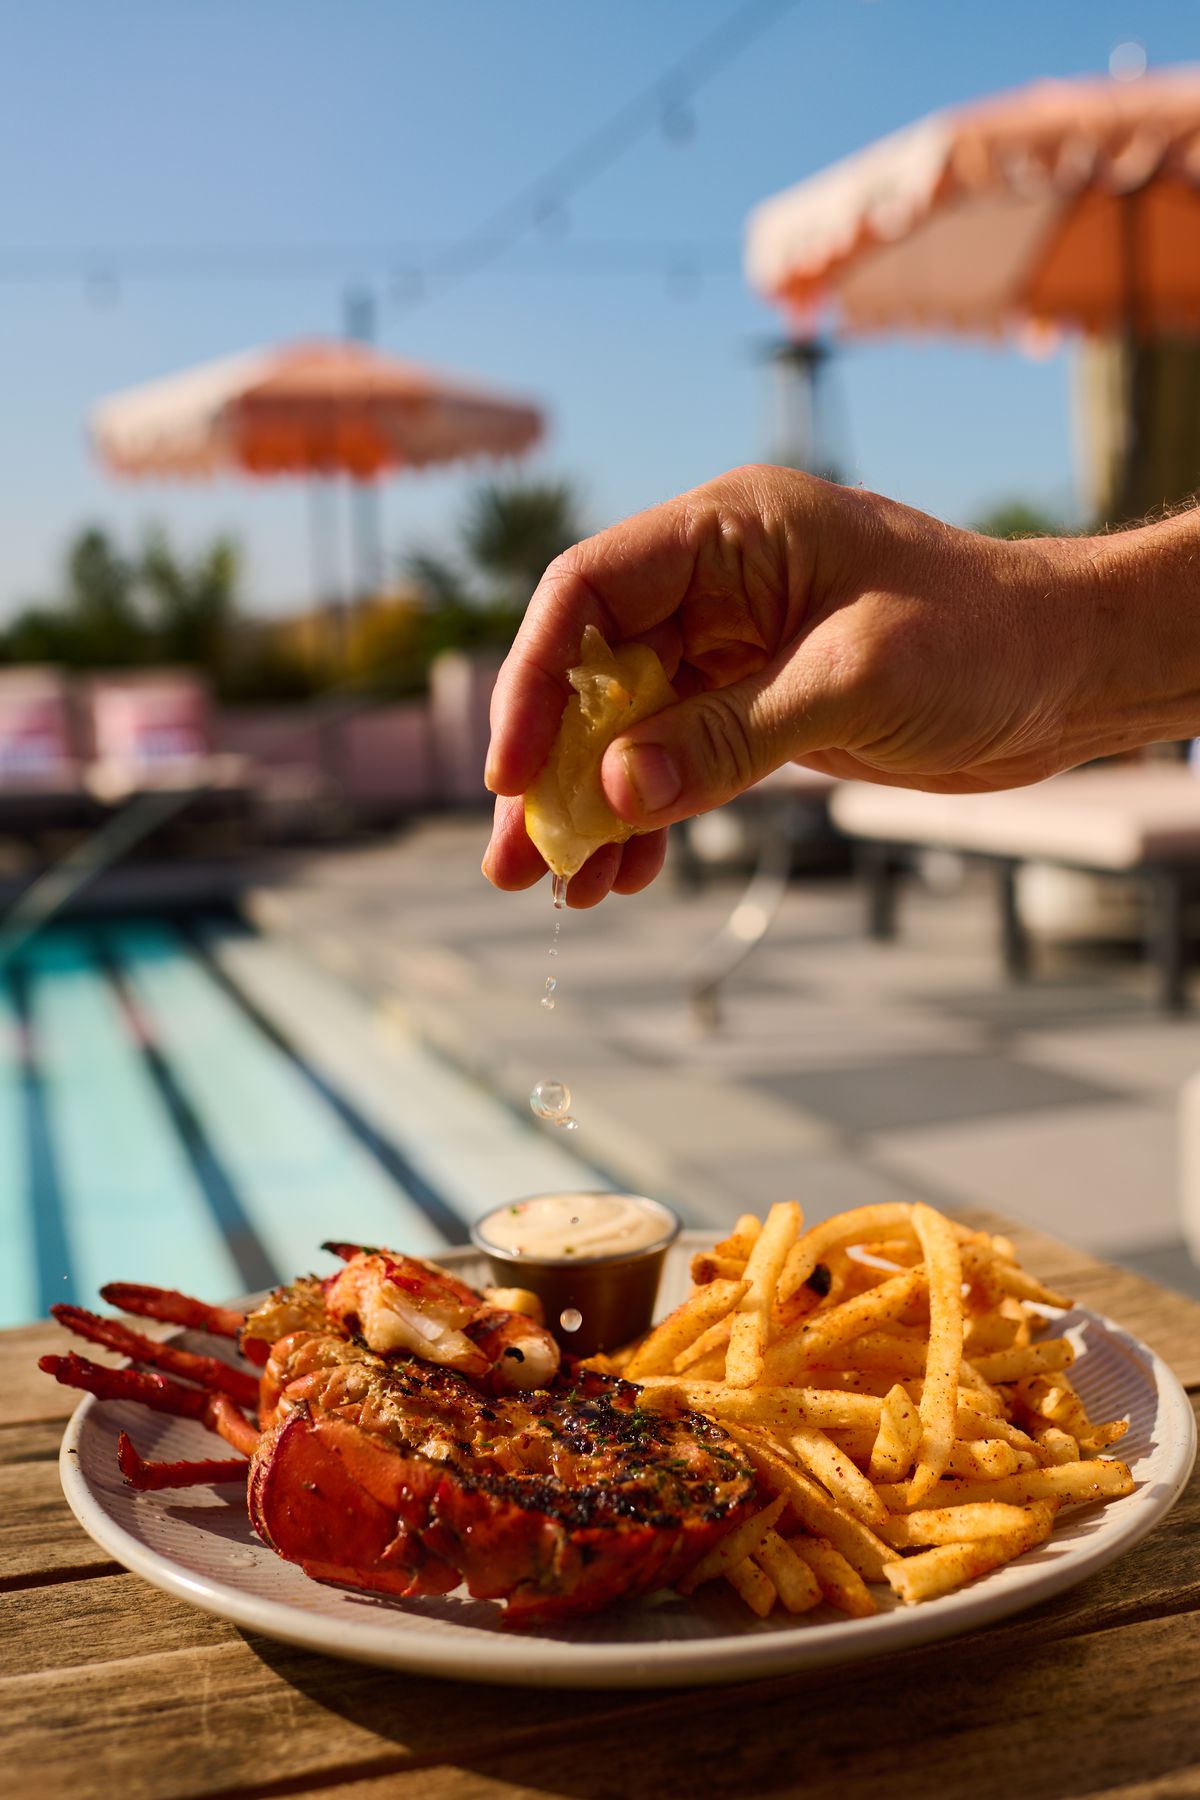 Grilled lobster and french fries at Canopy Club.